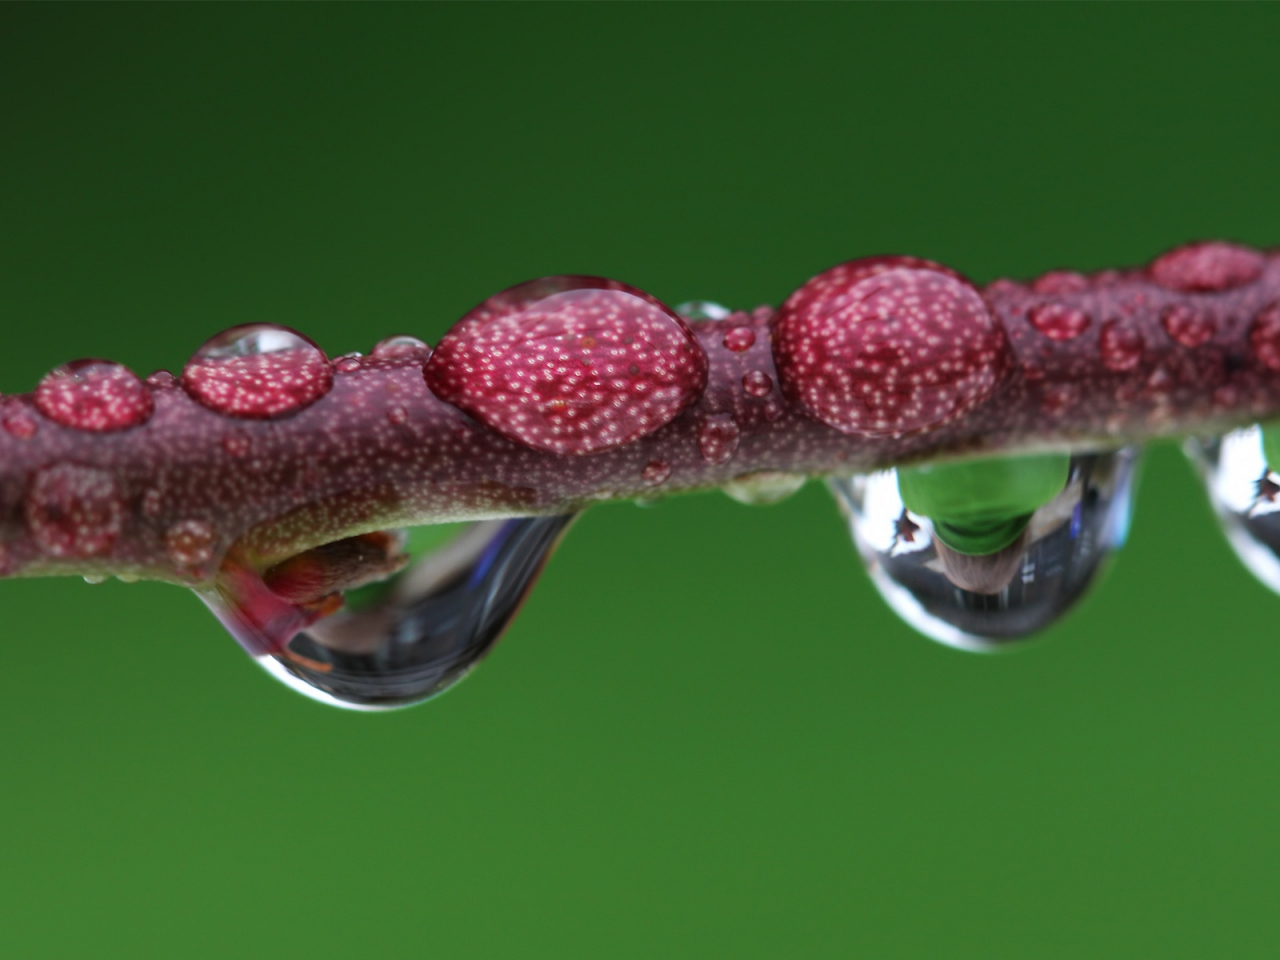 Droplet magnified branch for 1280 x 960 resolution